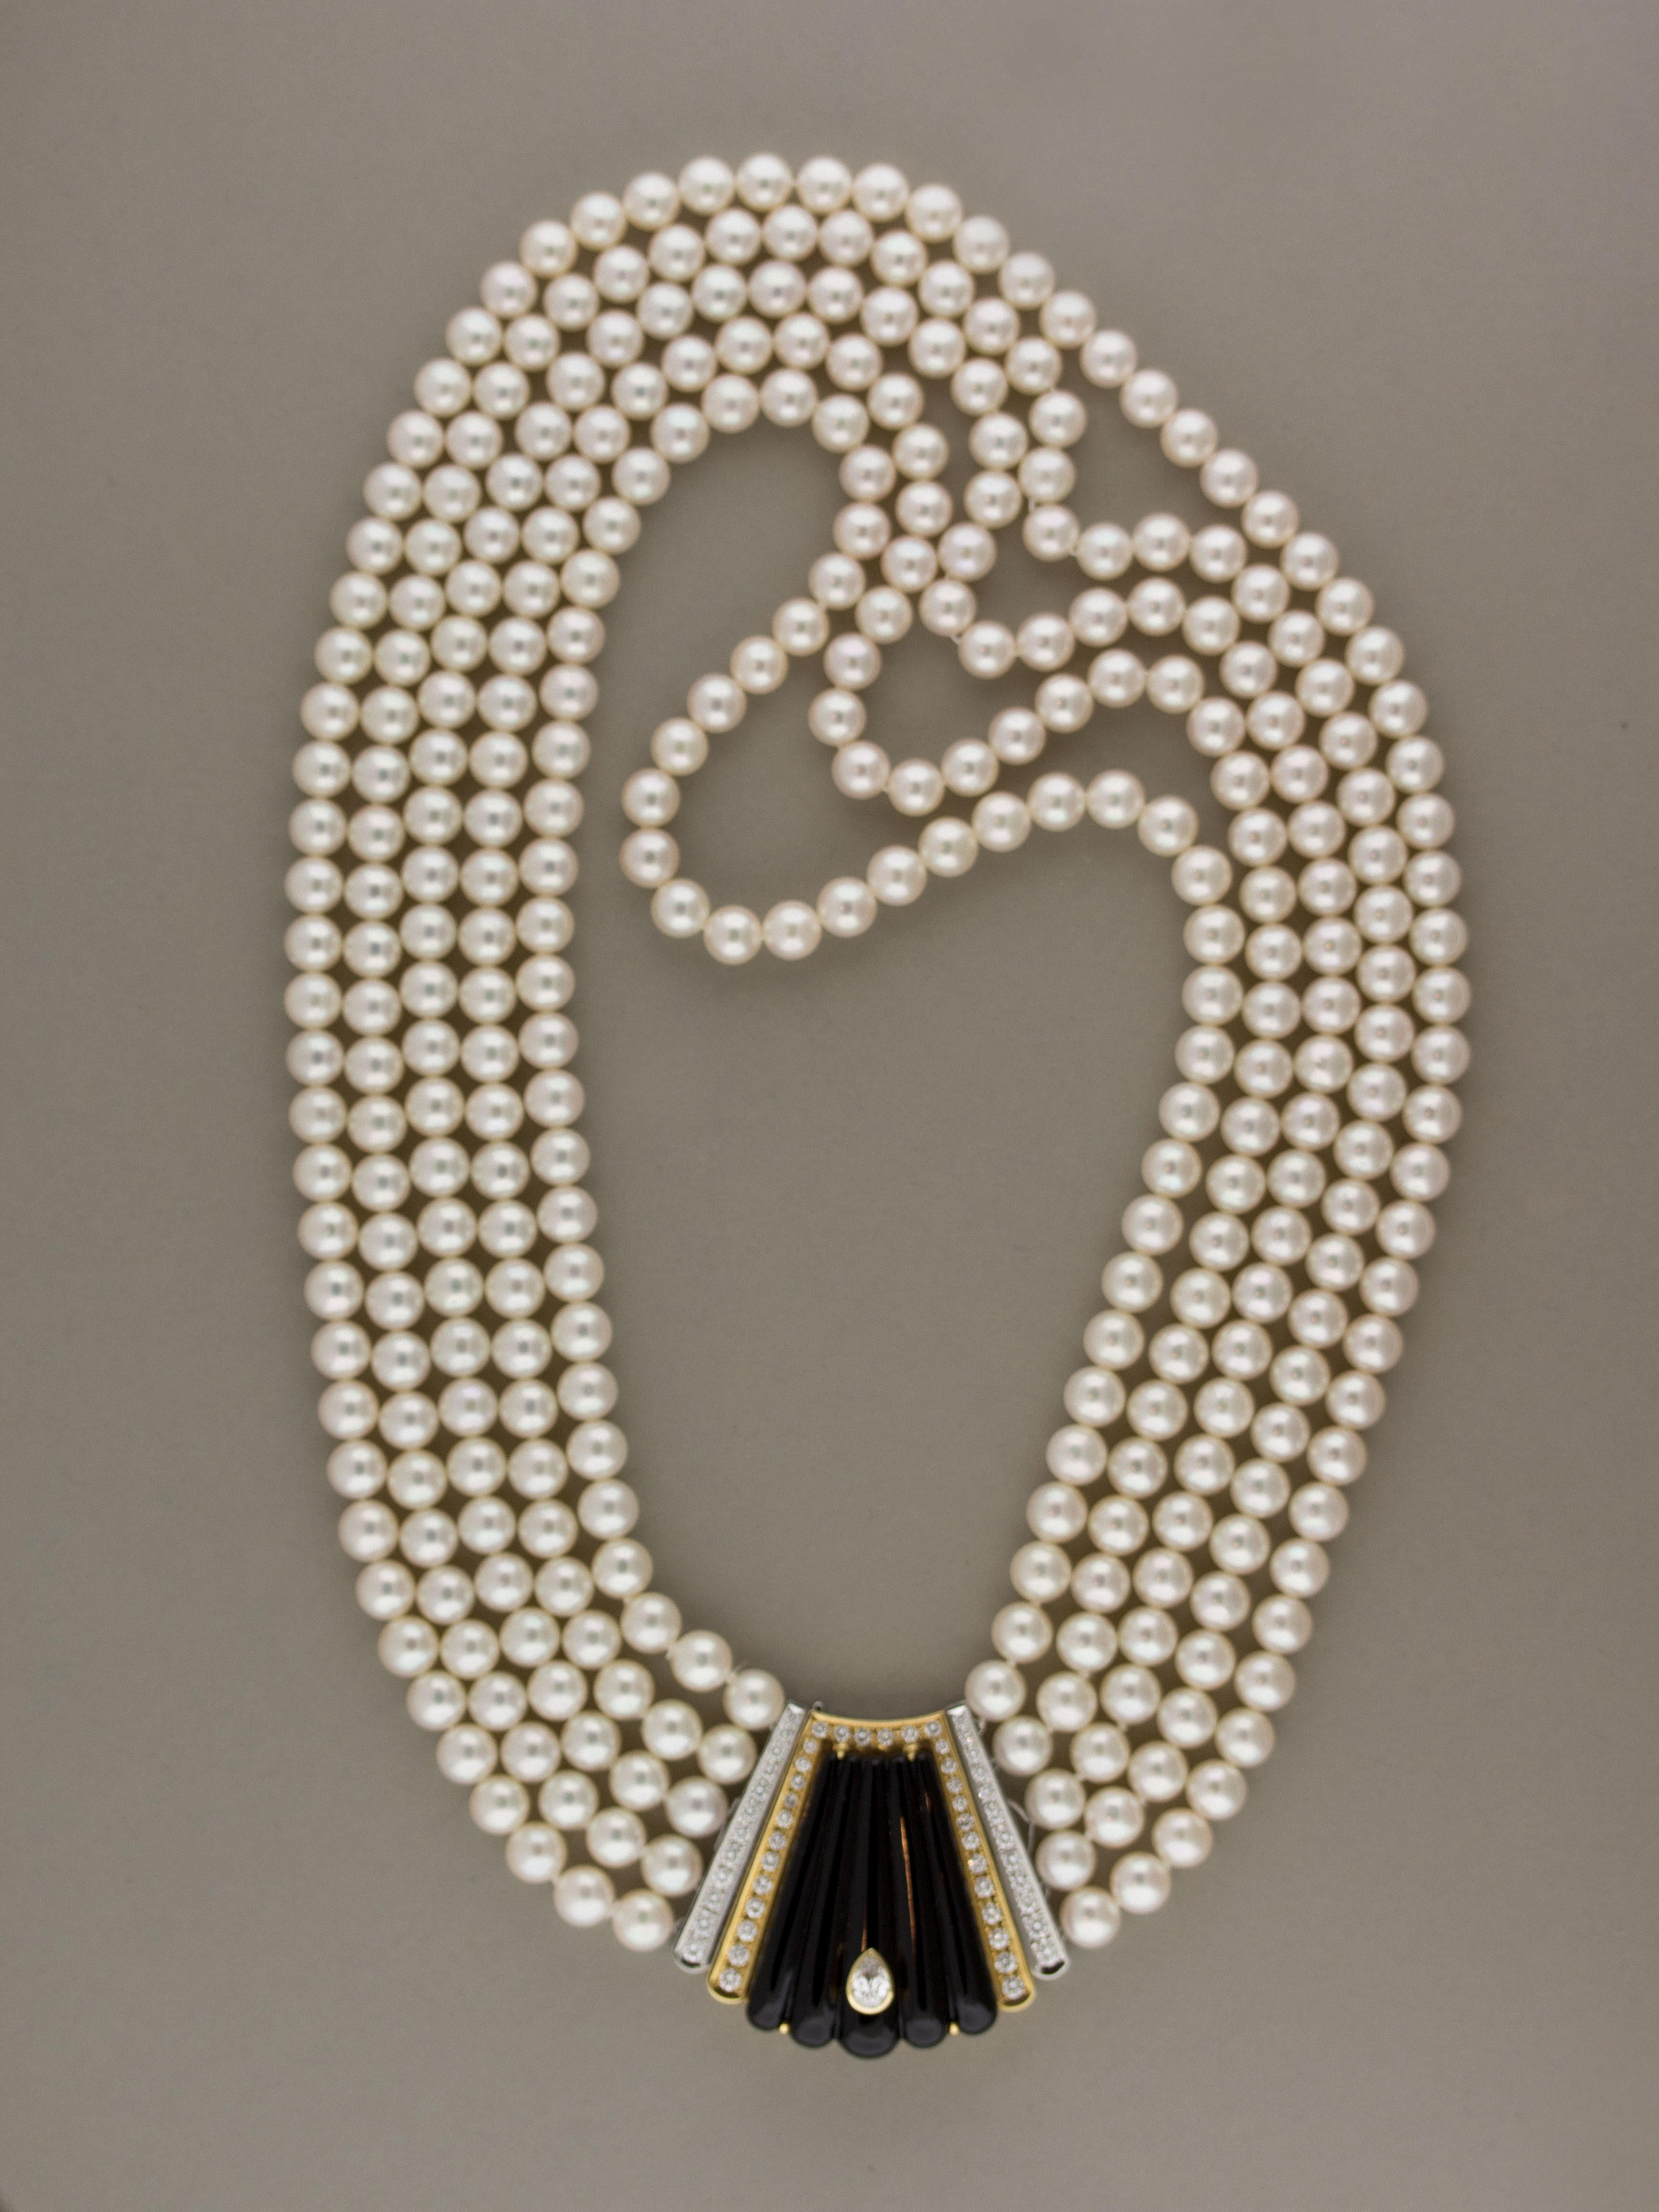 Five strands of round sweet pearls make the necklace of this wonderful piece. The center piece, made of 18k yellow gold and platinum, features a large black onyx with a 0.25 carat pear shape diamond set inside it. Around there are an additional 2.95